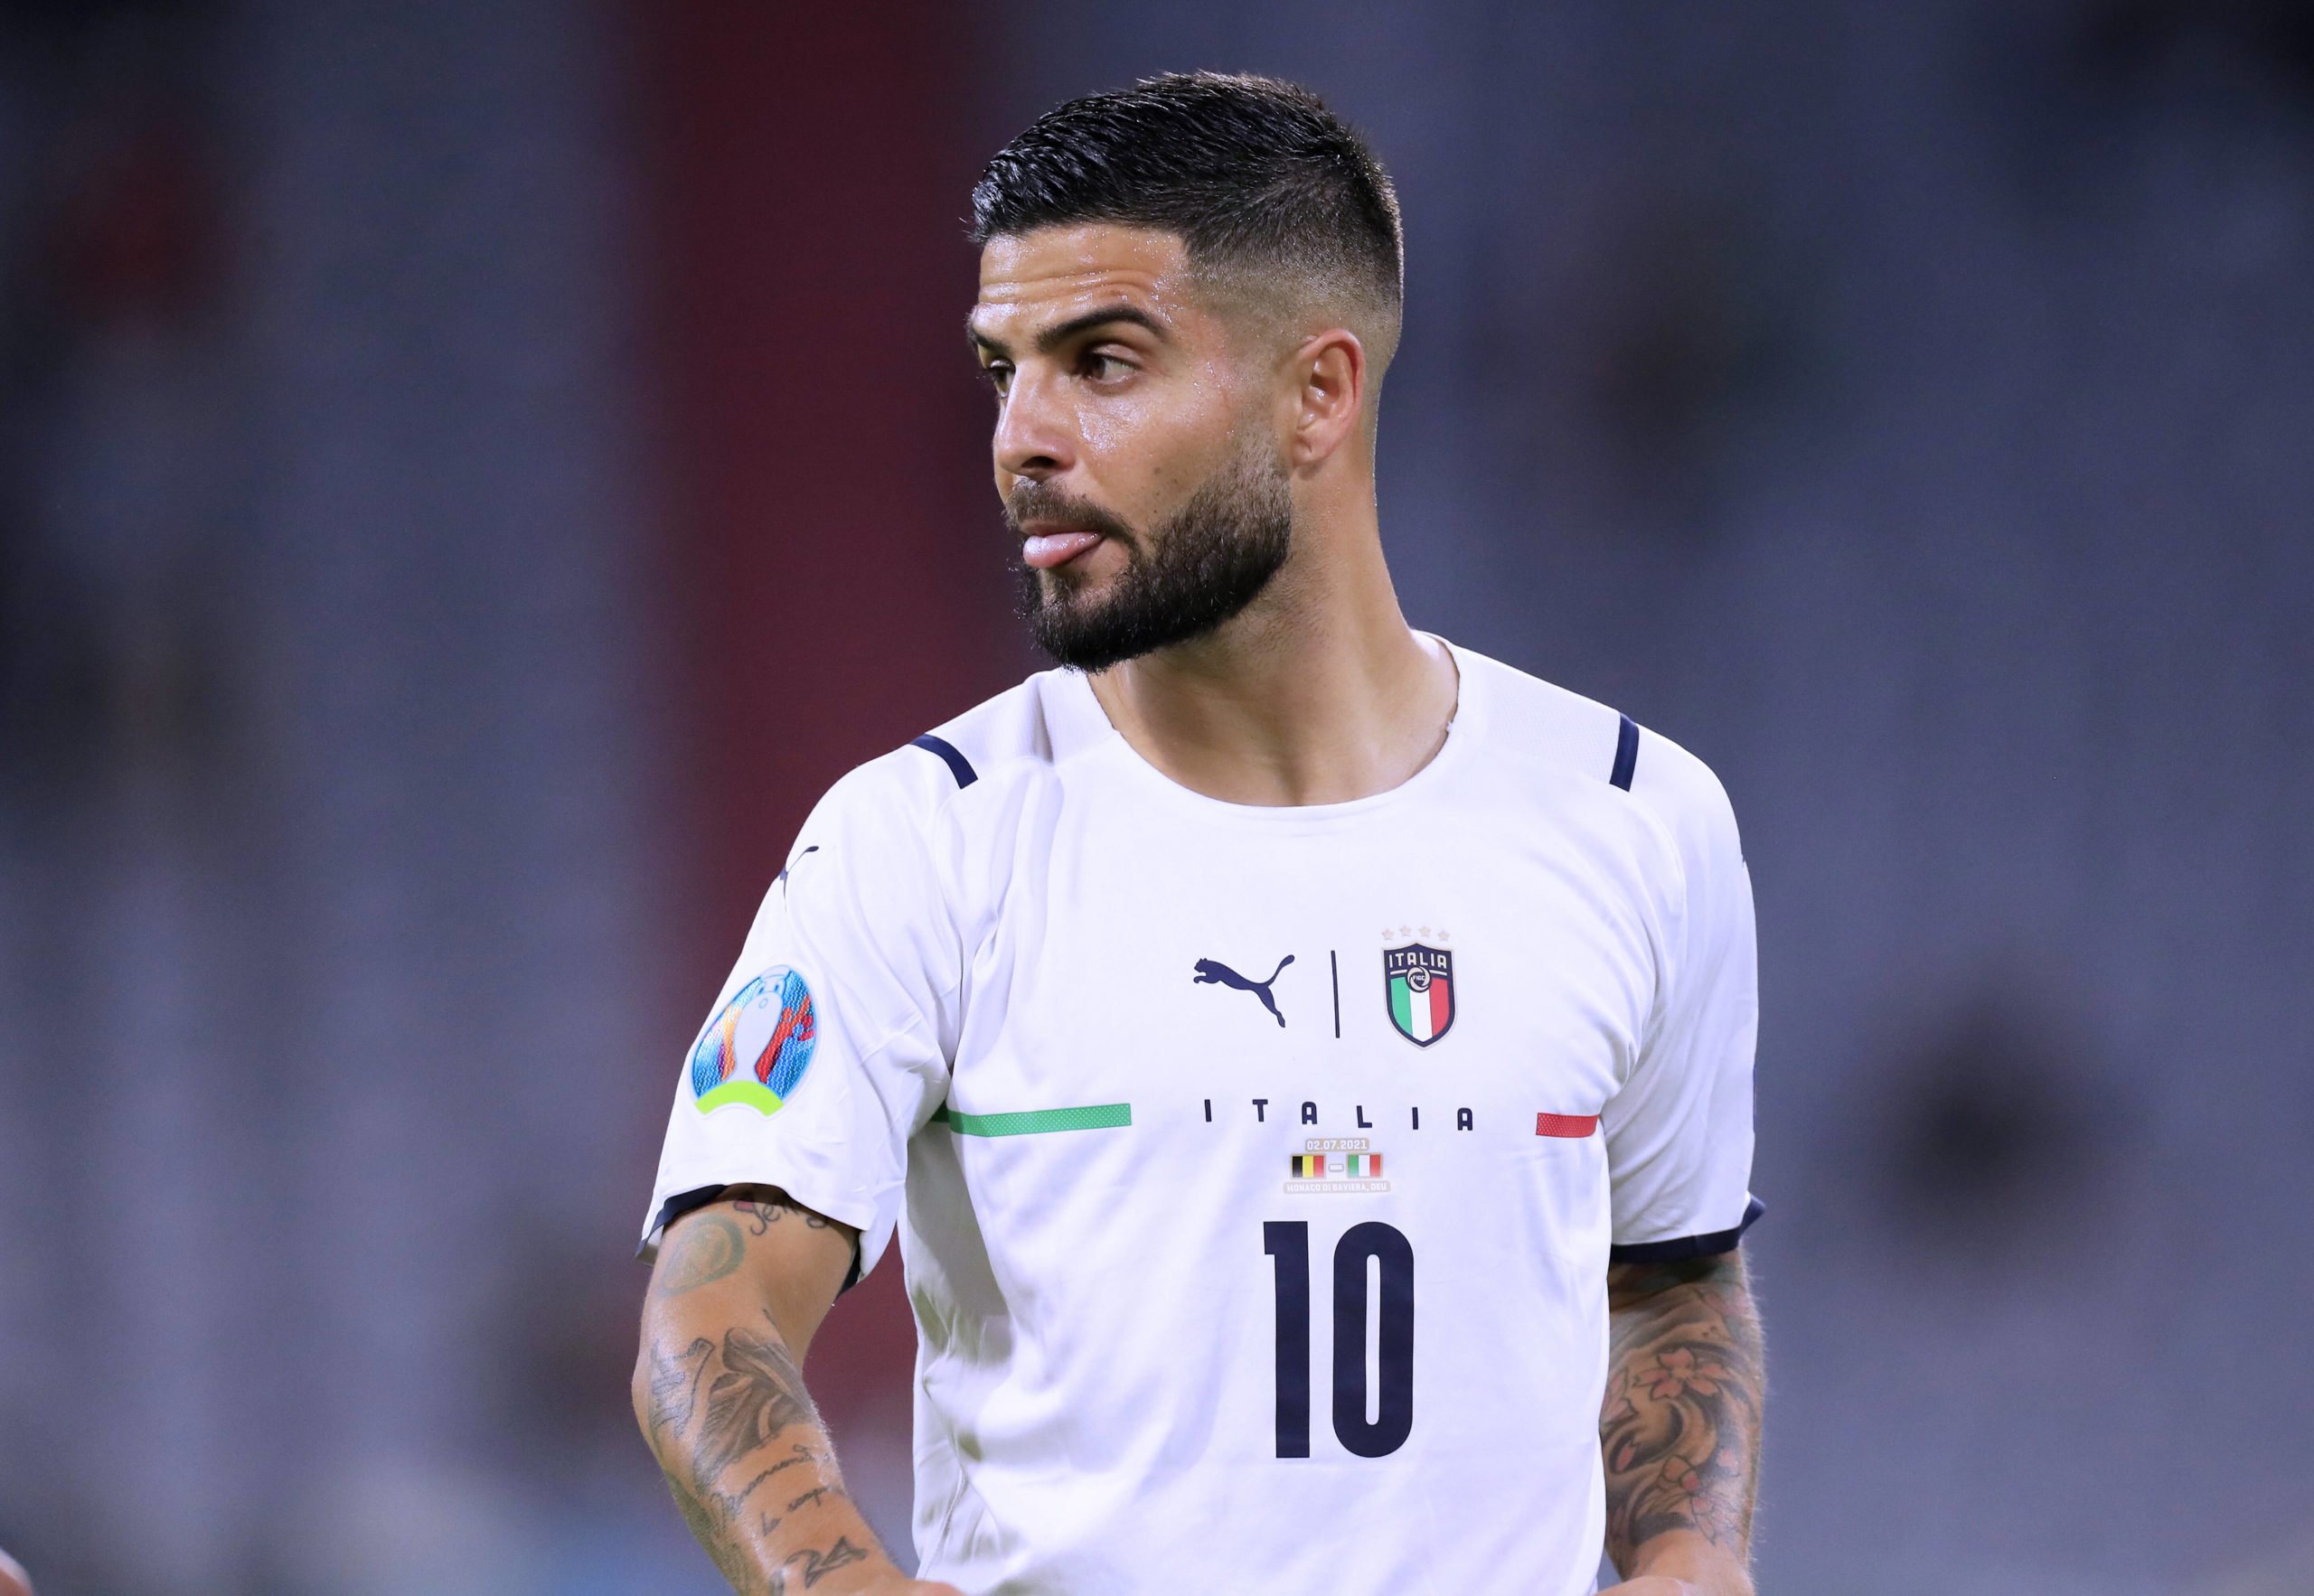 Barcelona to rival Tottenham Hotspur for Insigne who is seen in the picture